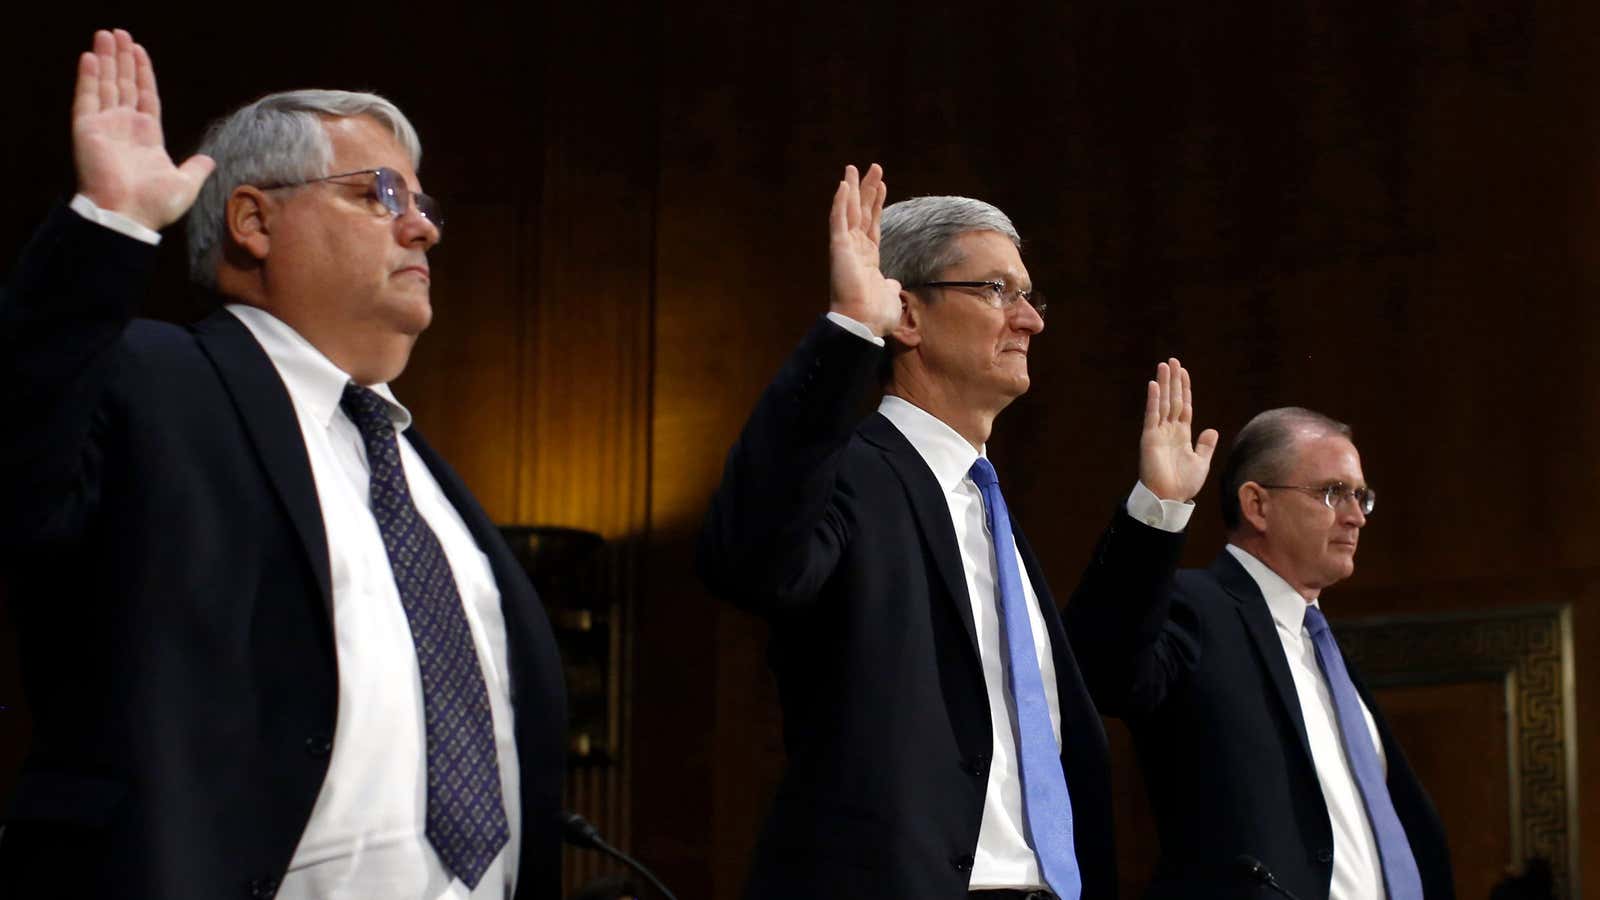 Apple execs, including former CFO Peter Oppenheimer (left), know all about the “detrimental impact on reputation” of their tax plans.